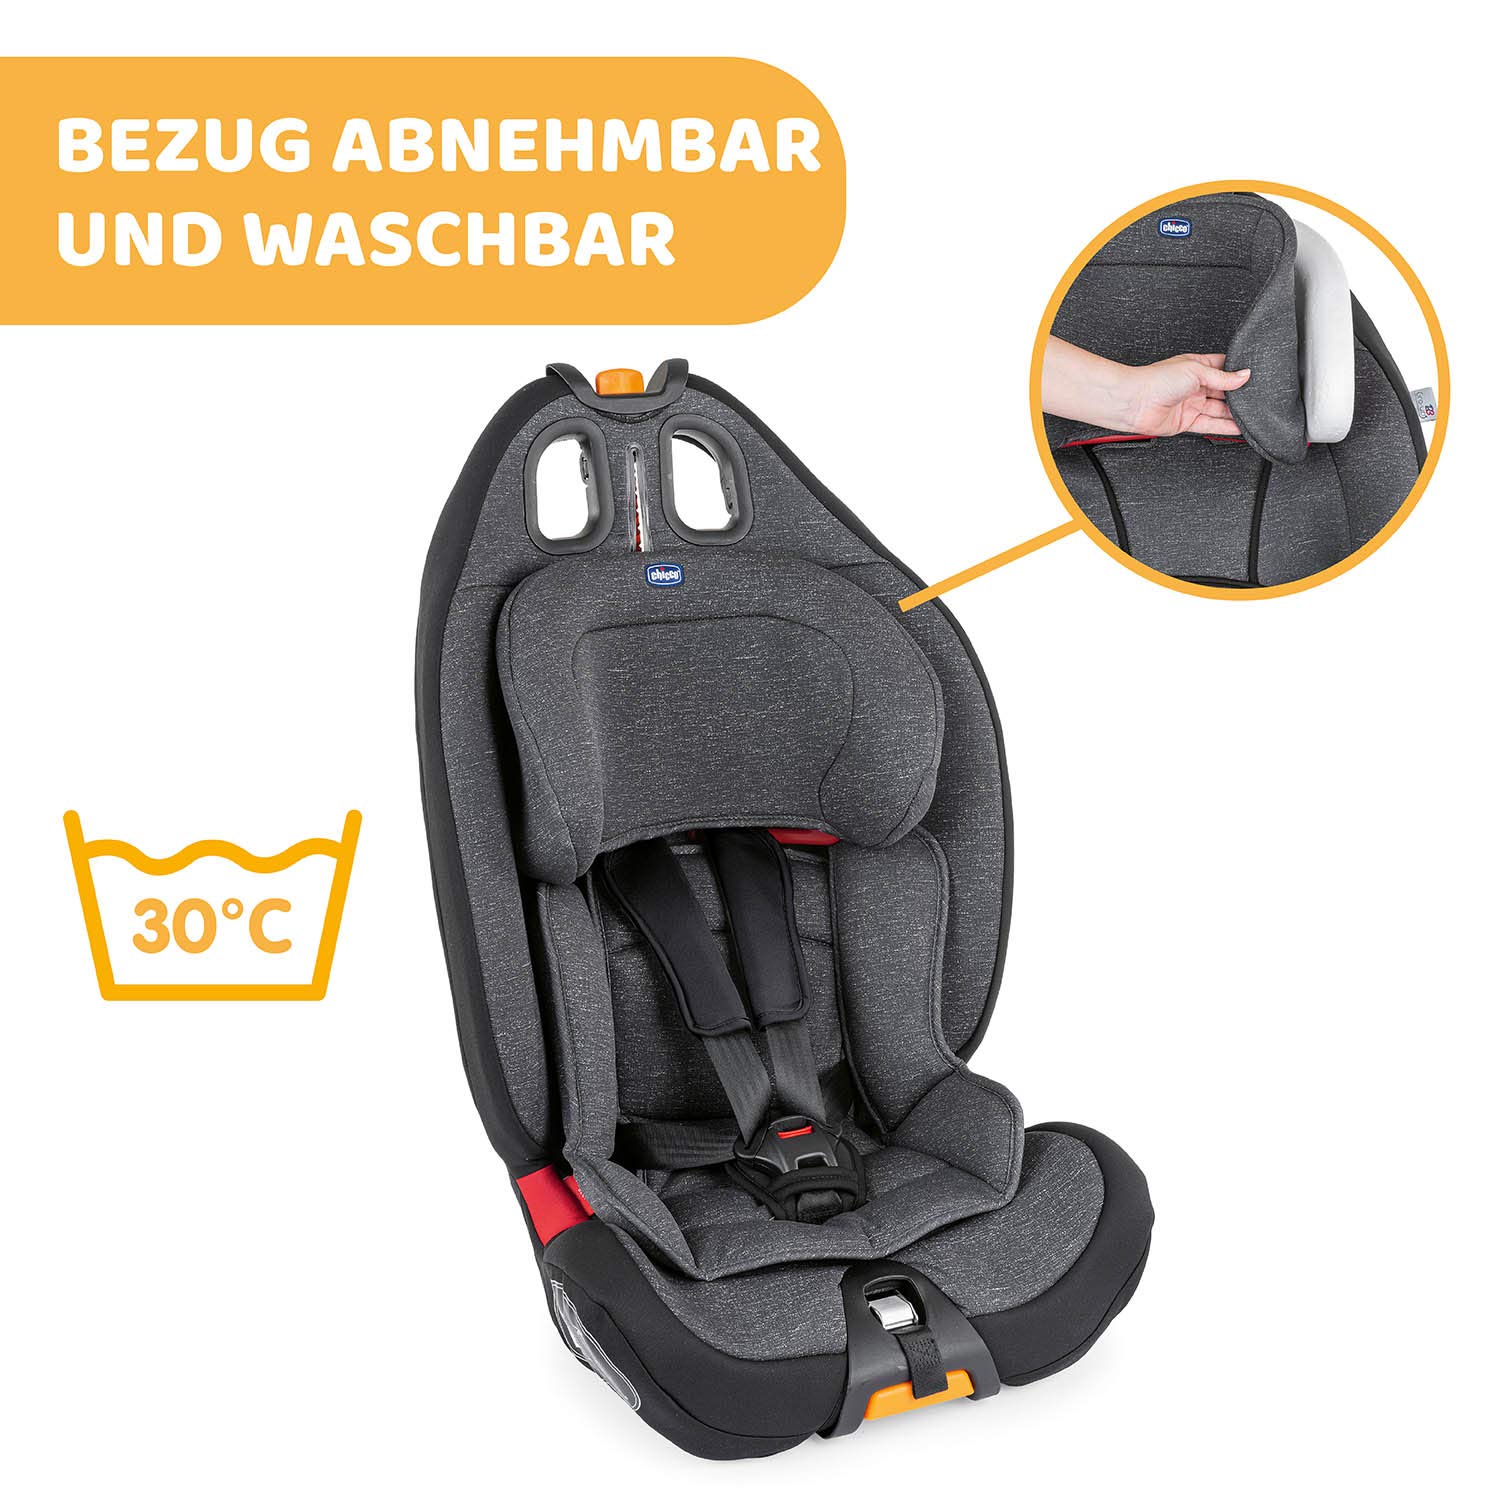 Chicco Gro-Up 123 Adjustable Child Car Seat 9-36 kg, Group 1/2/3 from 9 Months to 12 Years, with Adjustable Headrest, Seat Reducer and Soft Padding